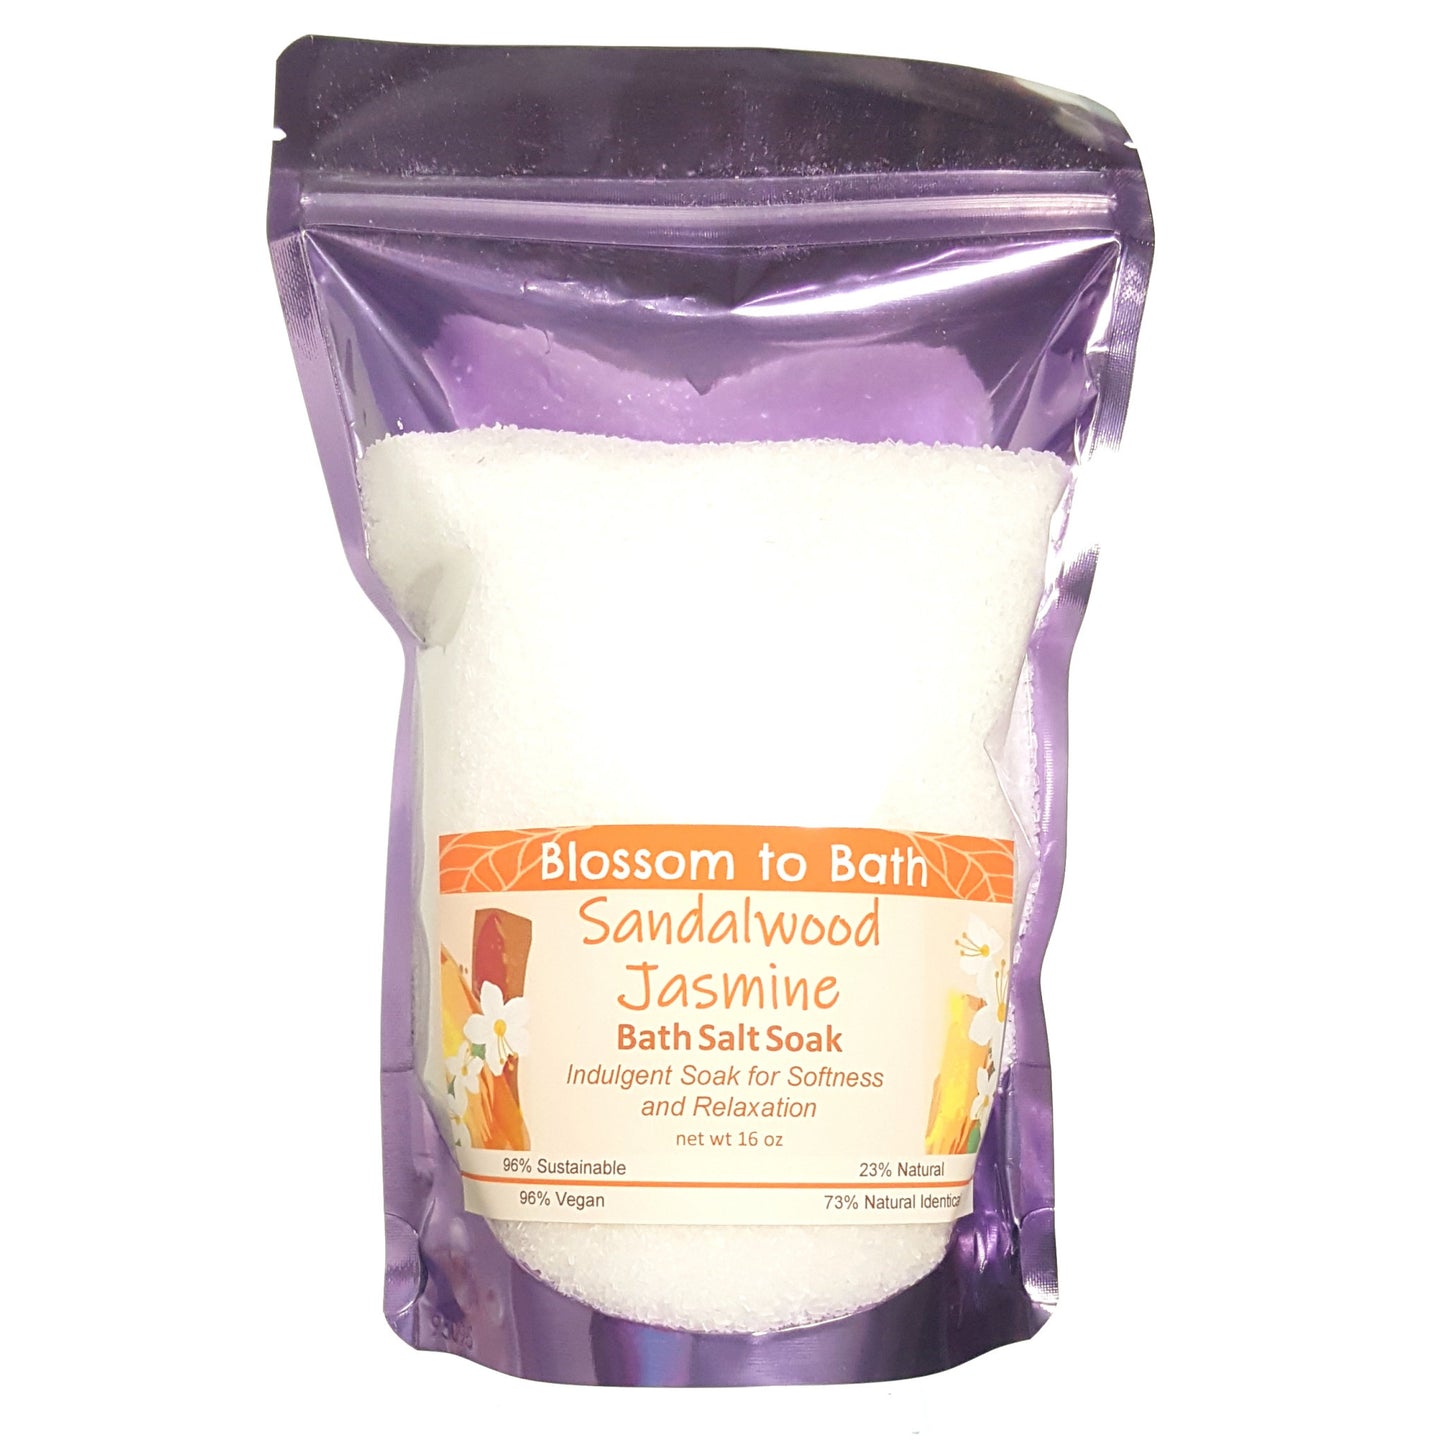 Buy Blossom to Bath Sandalwood Jasmine Bath Salt Soak from Flowersong Soap Studio.  Scented epsom salts for a luxurious soaking experience  Floral jasmine meets earthy sandalwood to create a soul stirring blend.